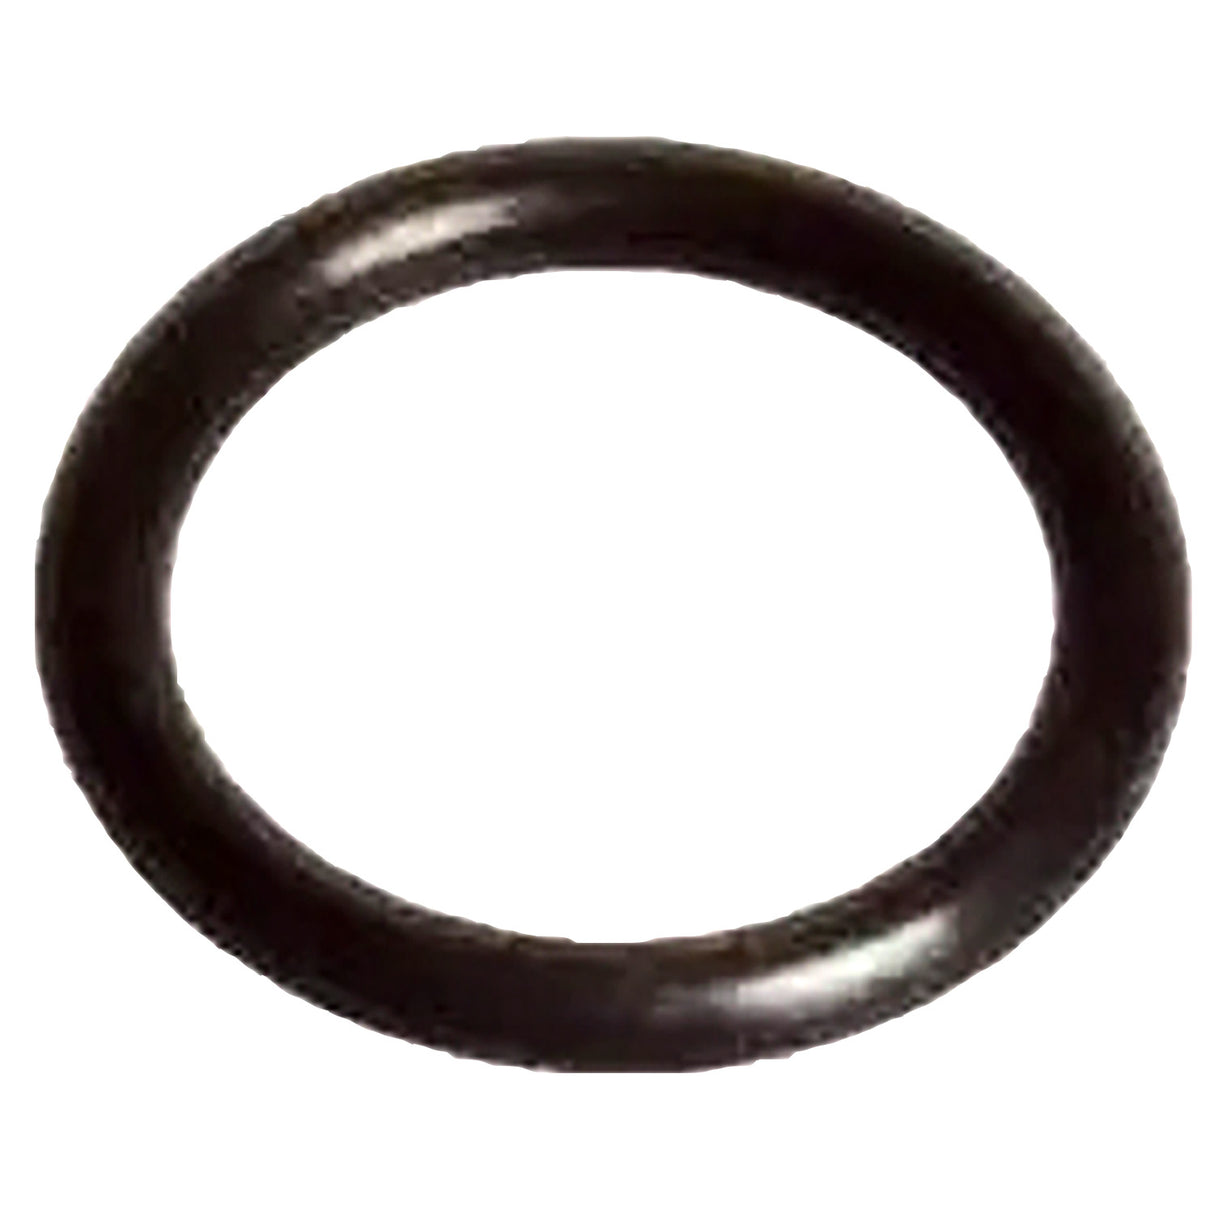 O-ring Adapter Nipple Liner Cup Fullwood